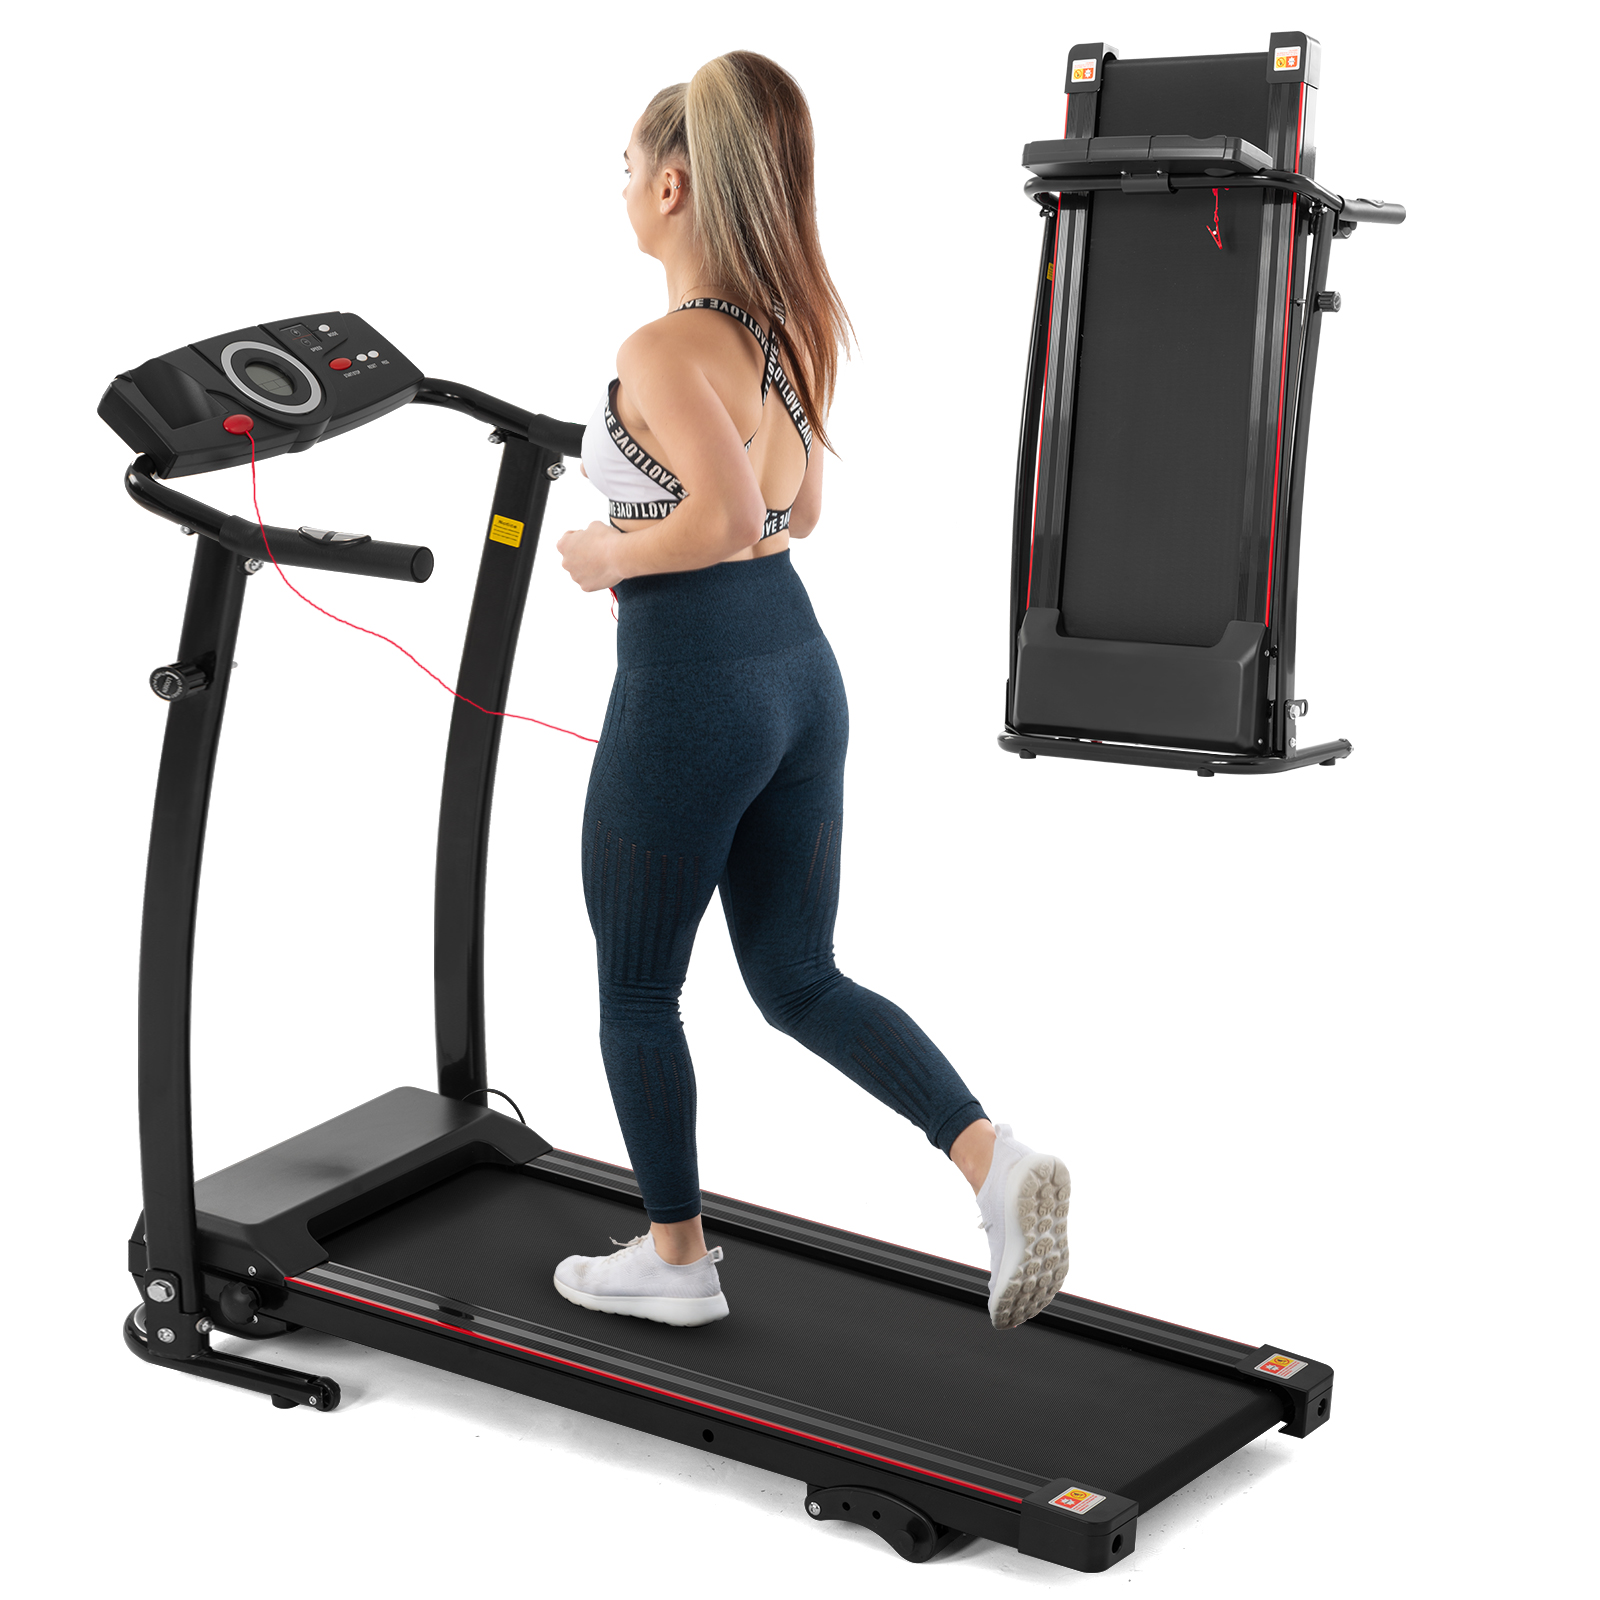 FYC Folding Treadmills for Home -2.25HP Electric Treadmill 265 LBS Weight Capacity, Easy Assemble with Incline/LCD Display, Portable Running Walking Workout for Home Gym Saver Space(JK0805E-3)-Boyel Living